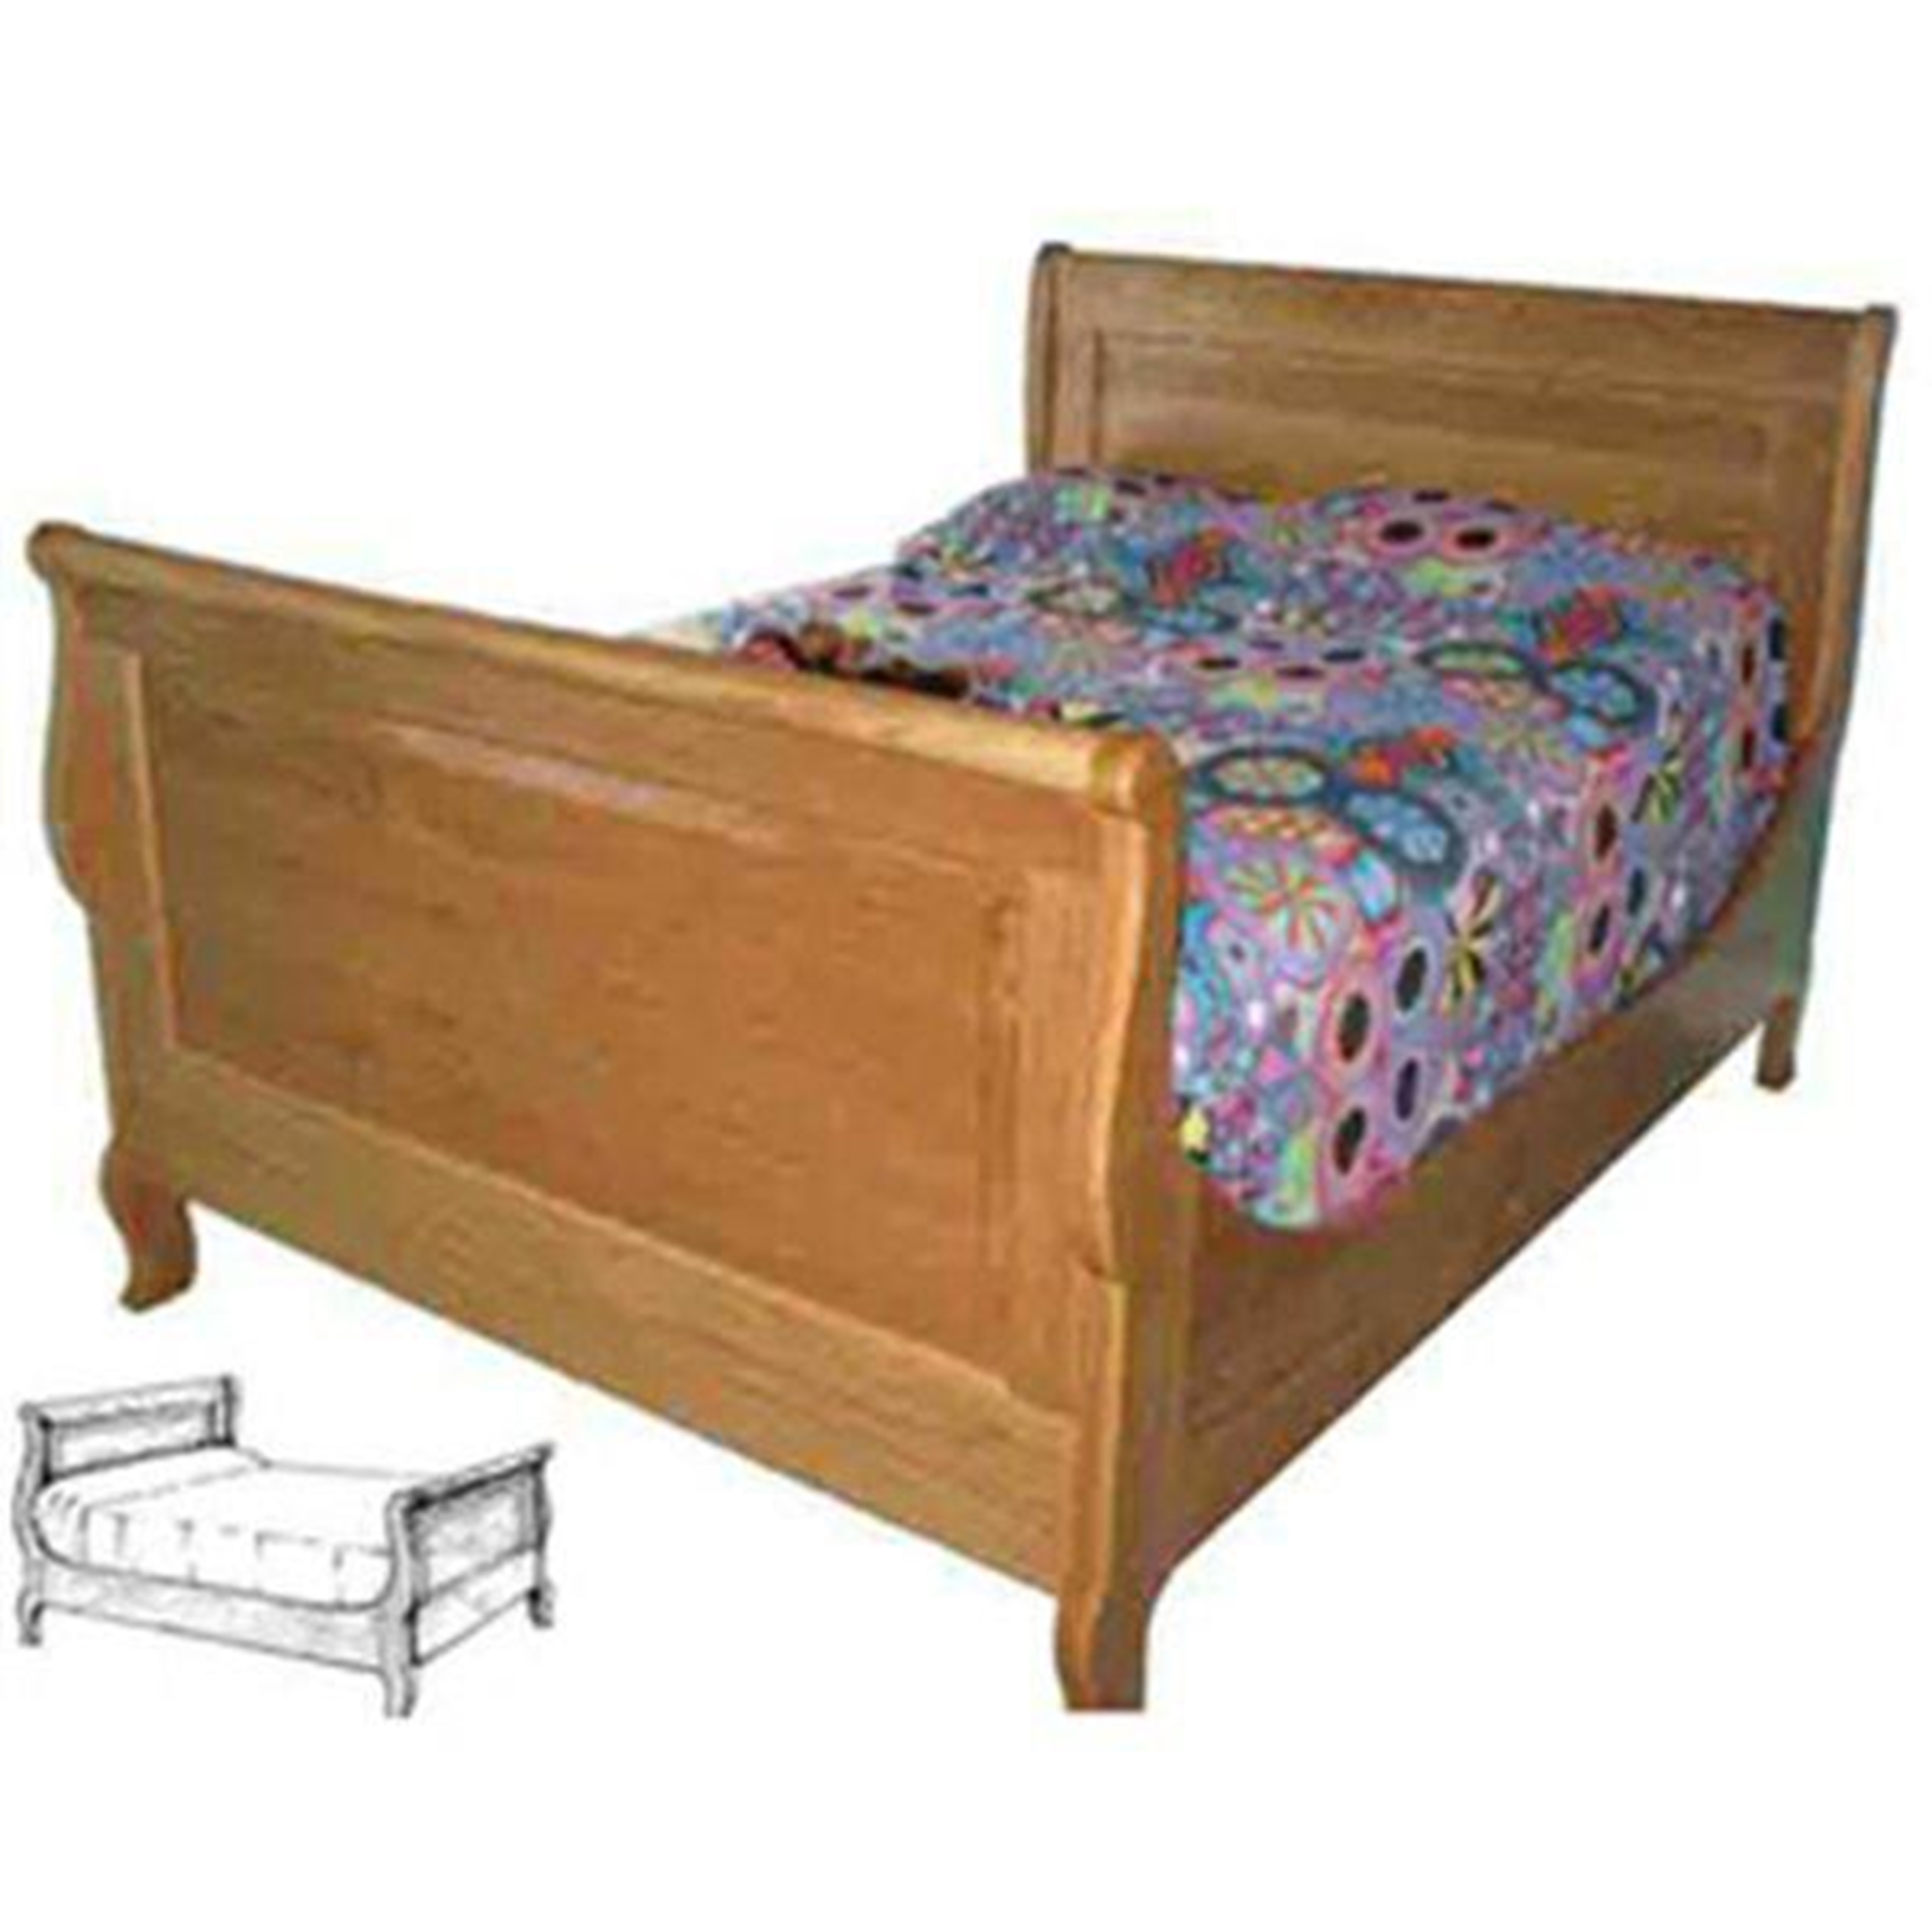 Woodworking Project Paper Plan To Build French American Sleigh Bed